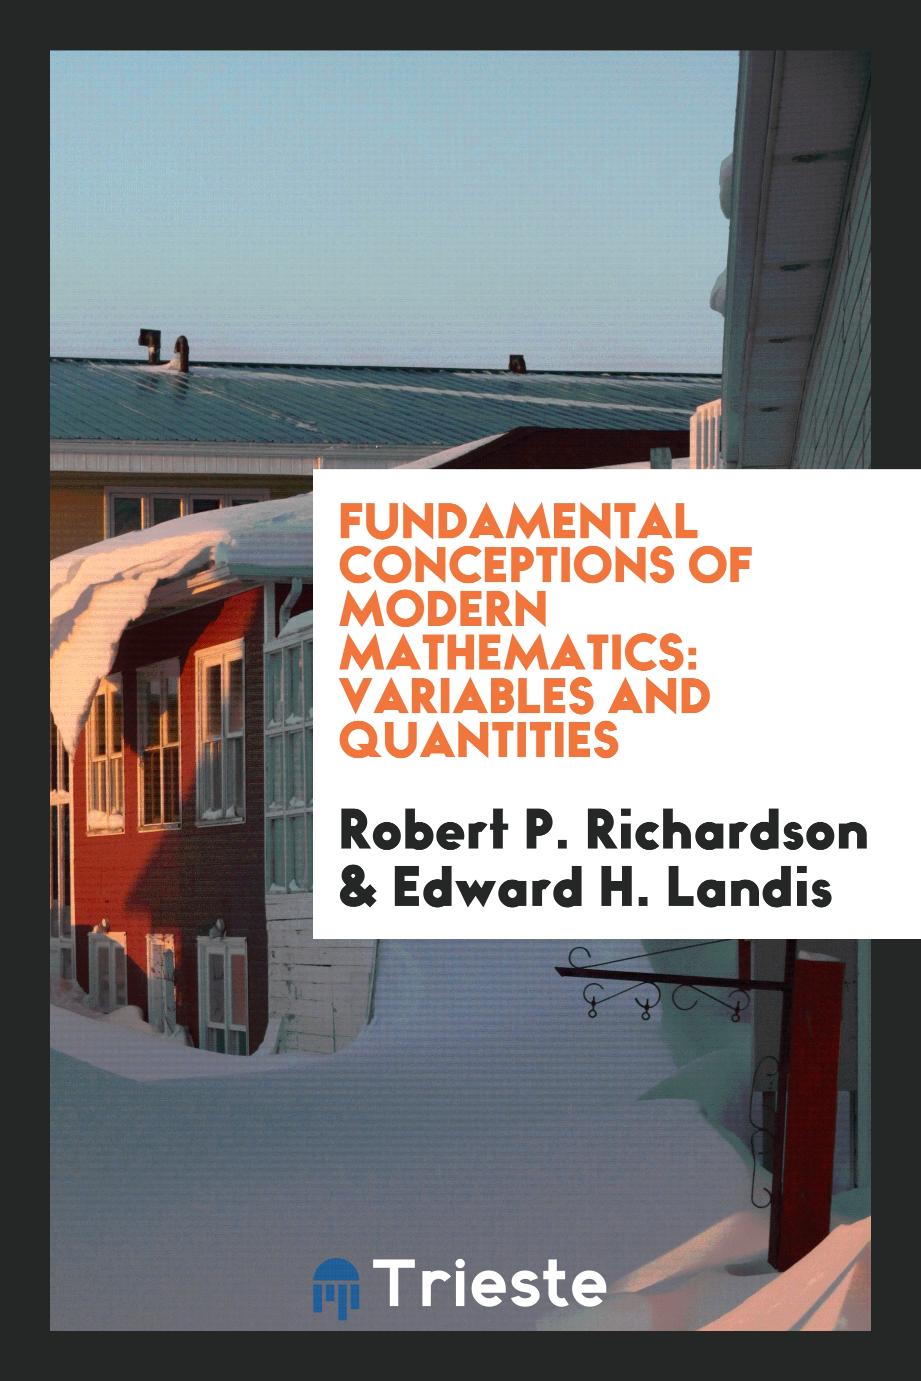 Fundamental conceptions of modern mathematics: Variables and Quantities